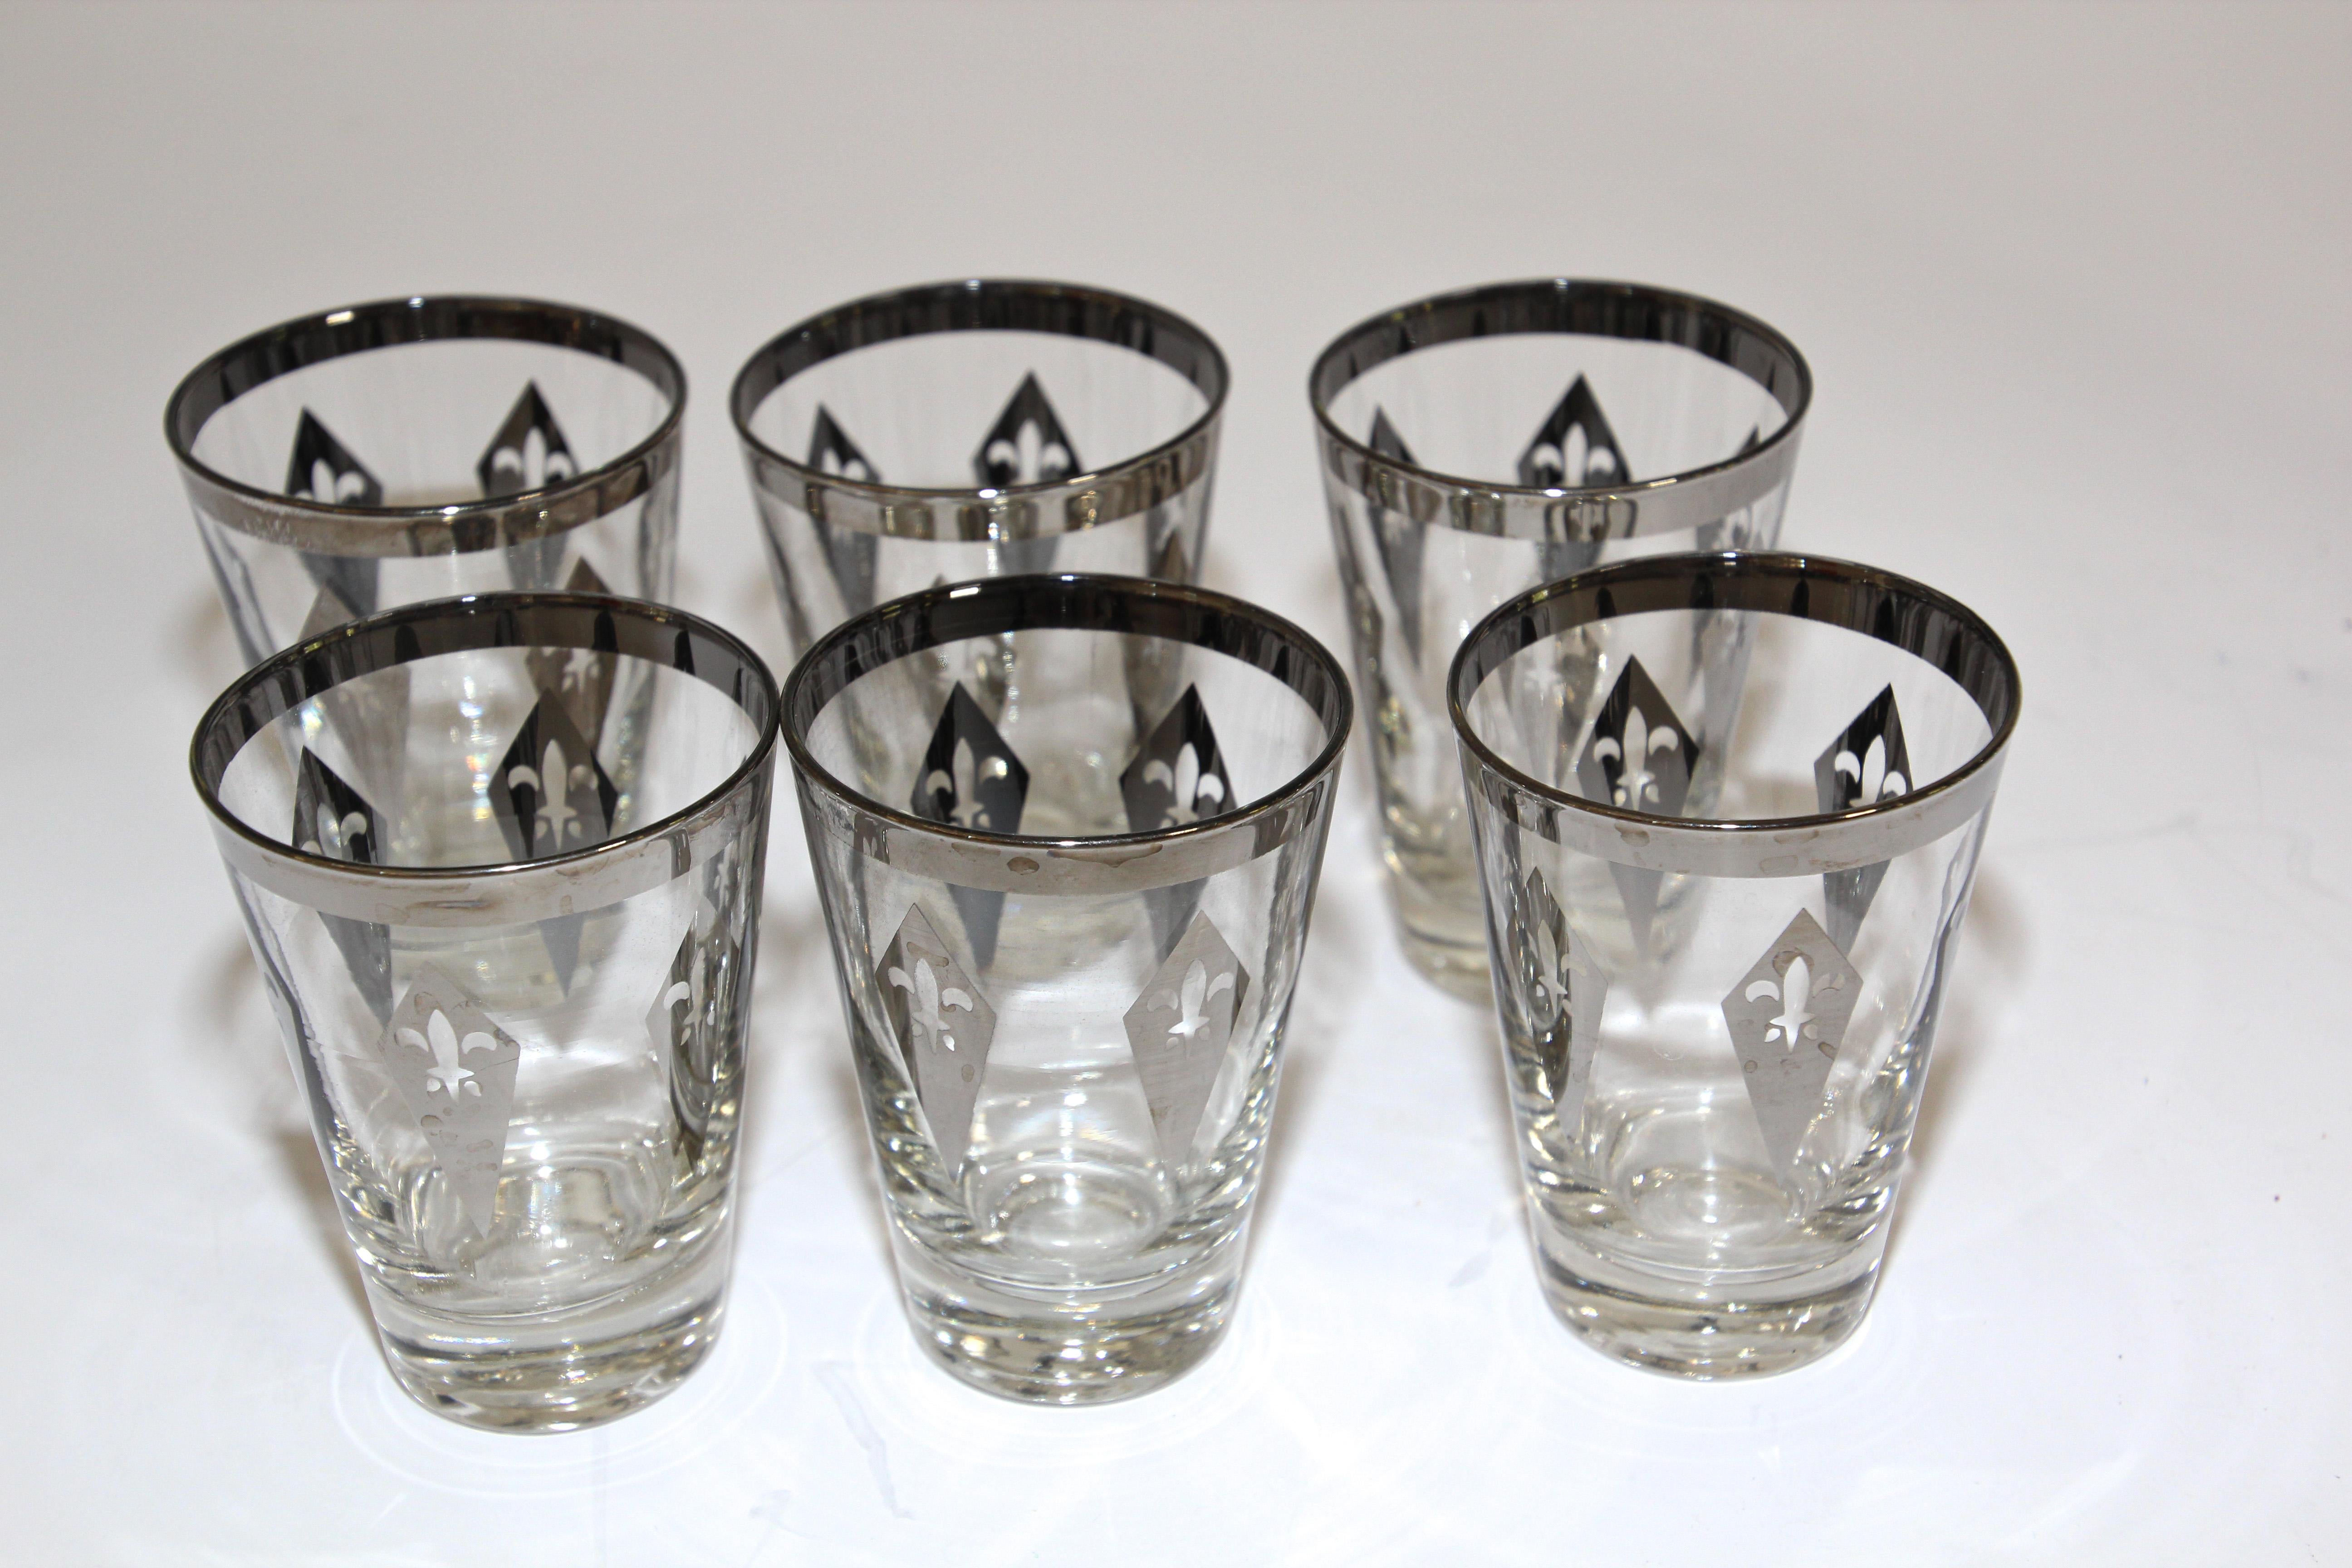 Vintage Barware Set of Six Glasses with Silver Overlay in Carrier Caddy 1